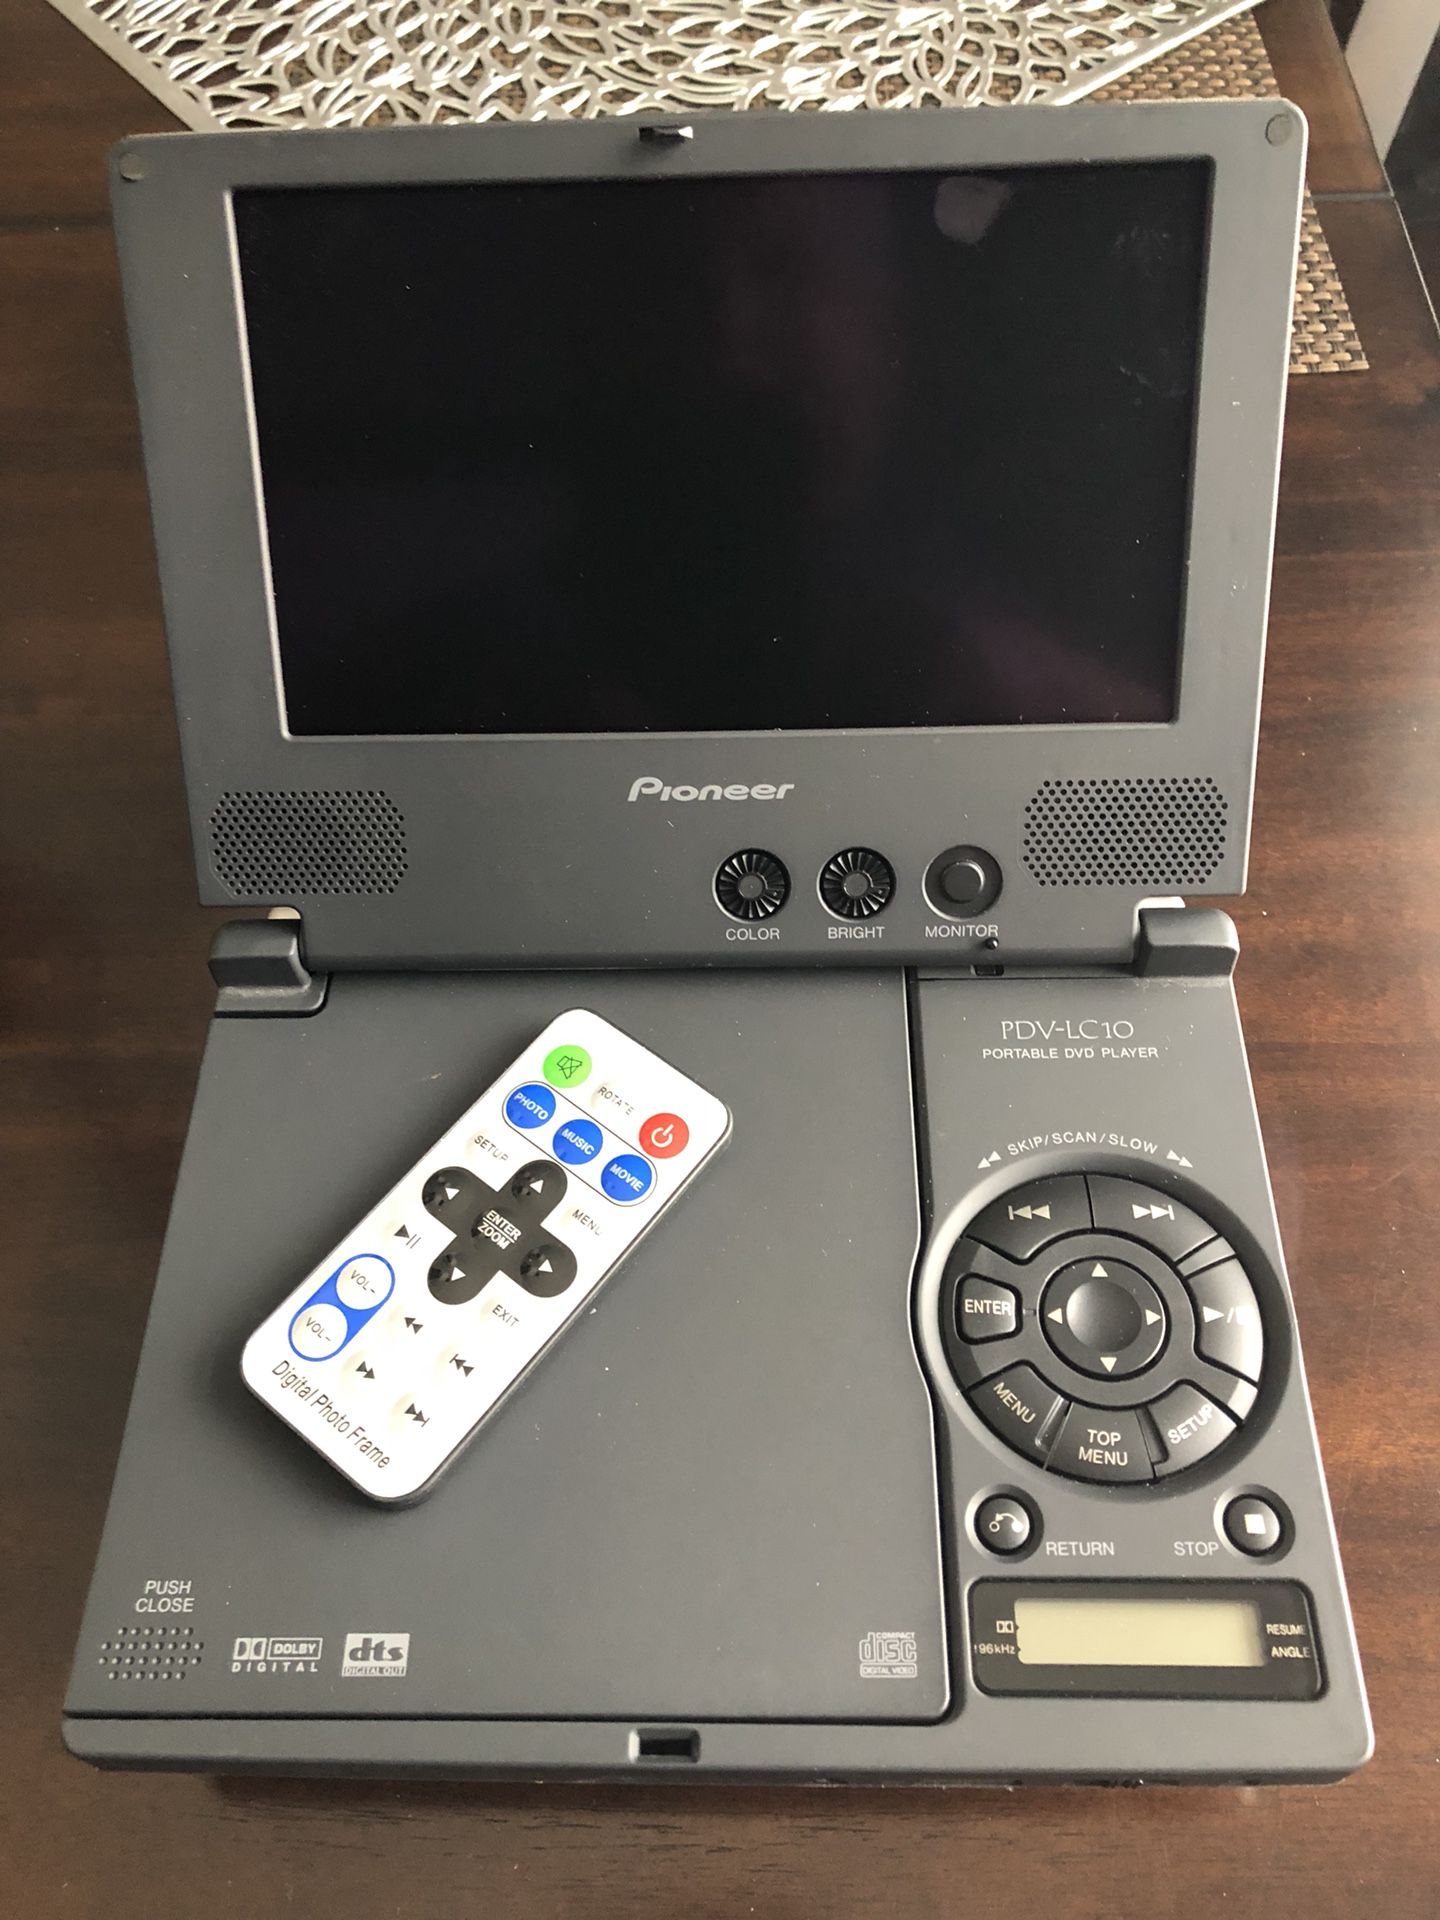 Pioneer portable personal DVD player